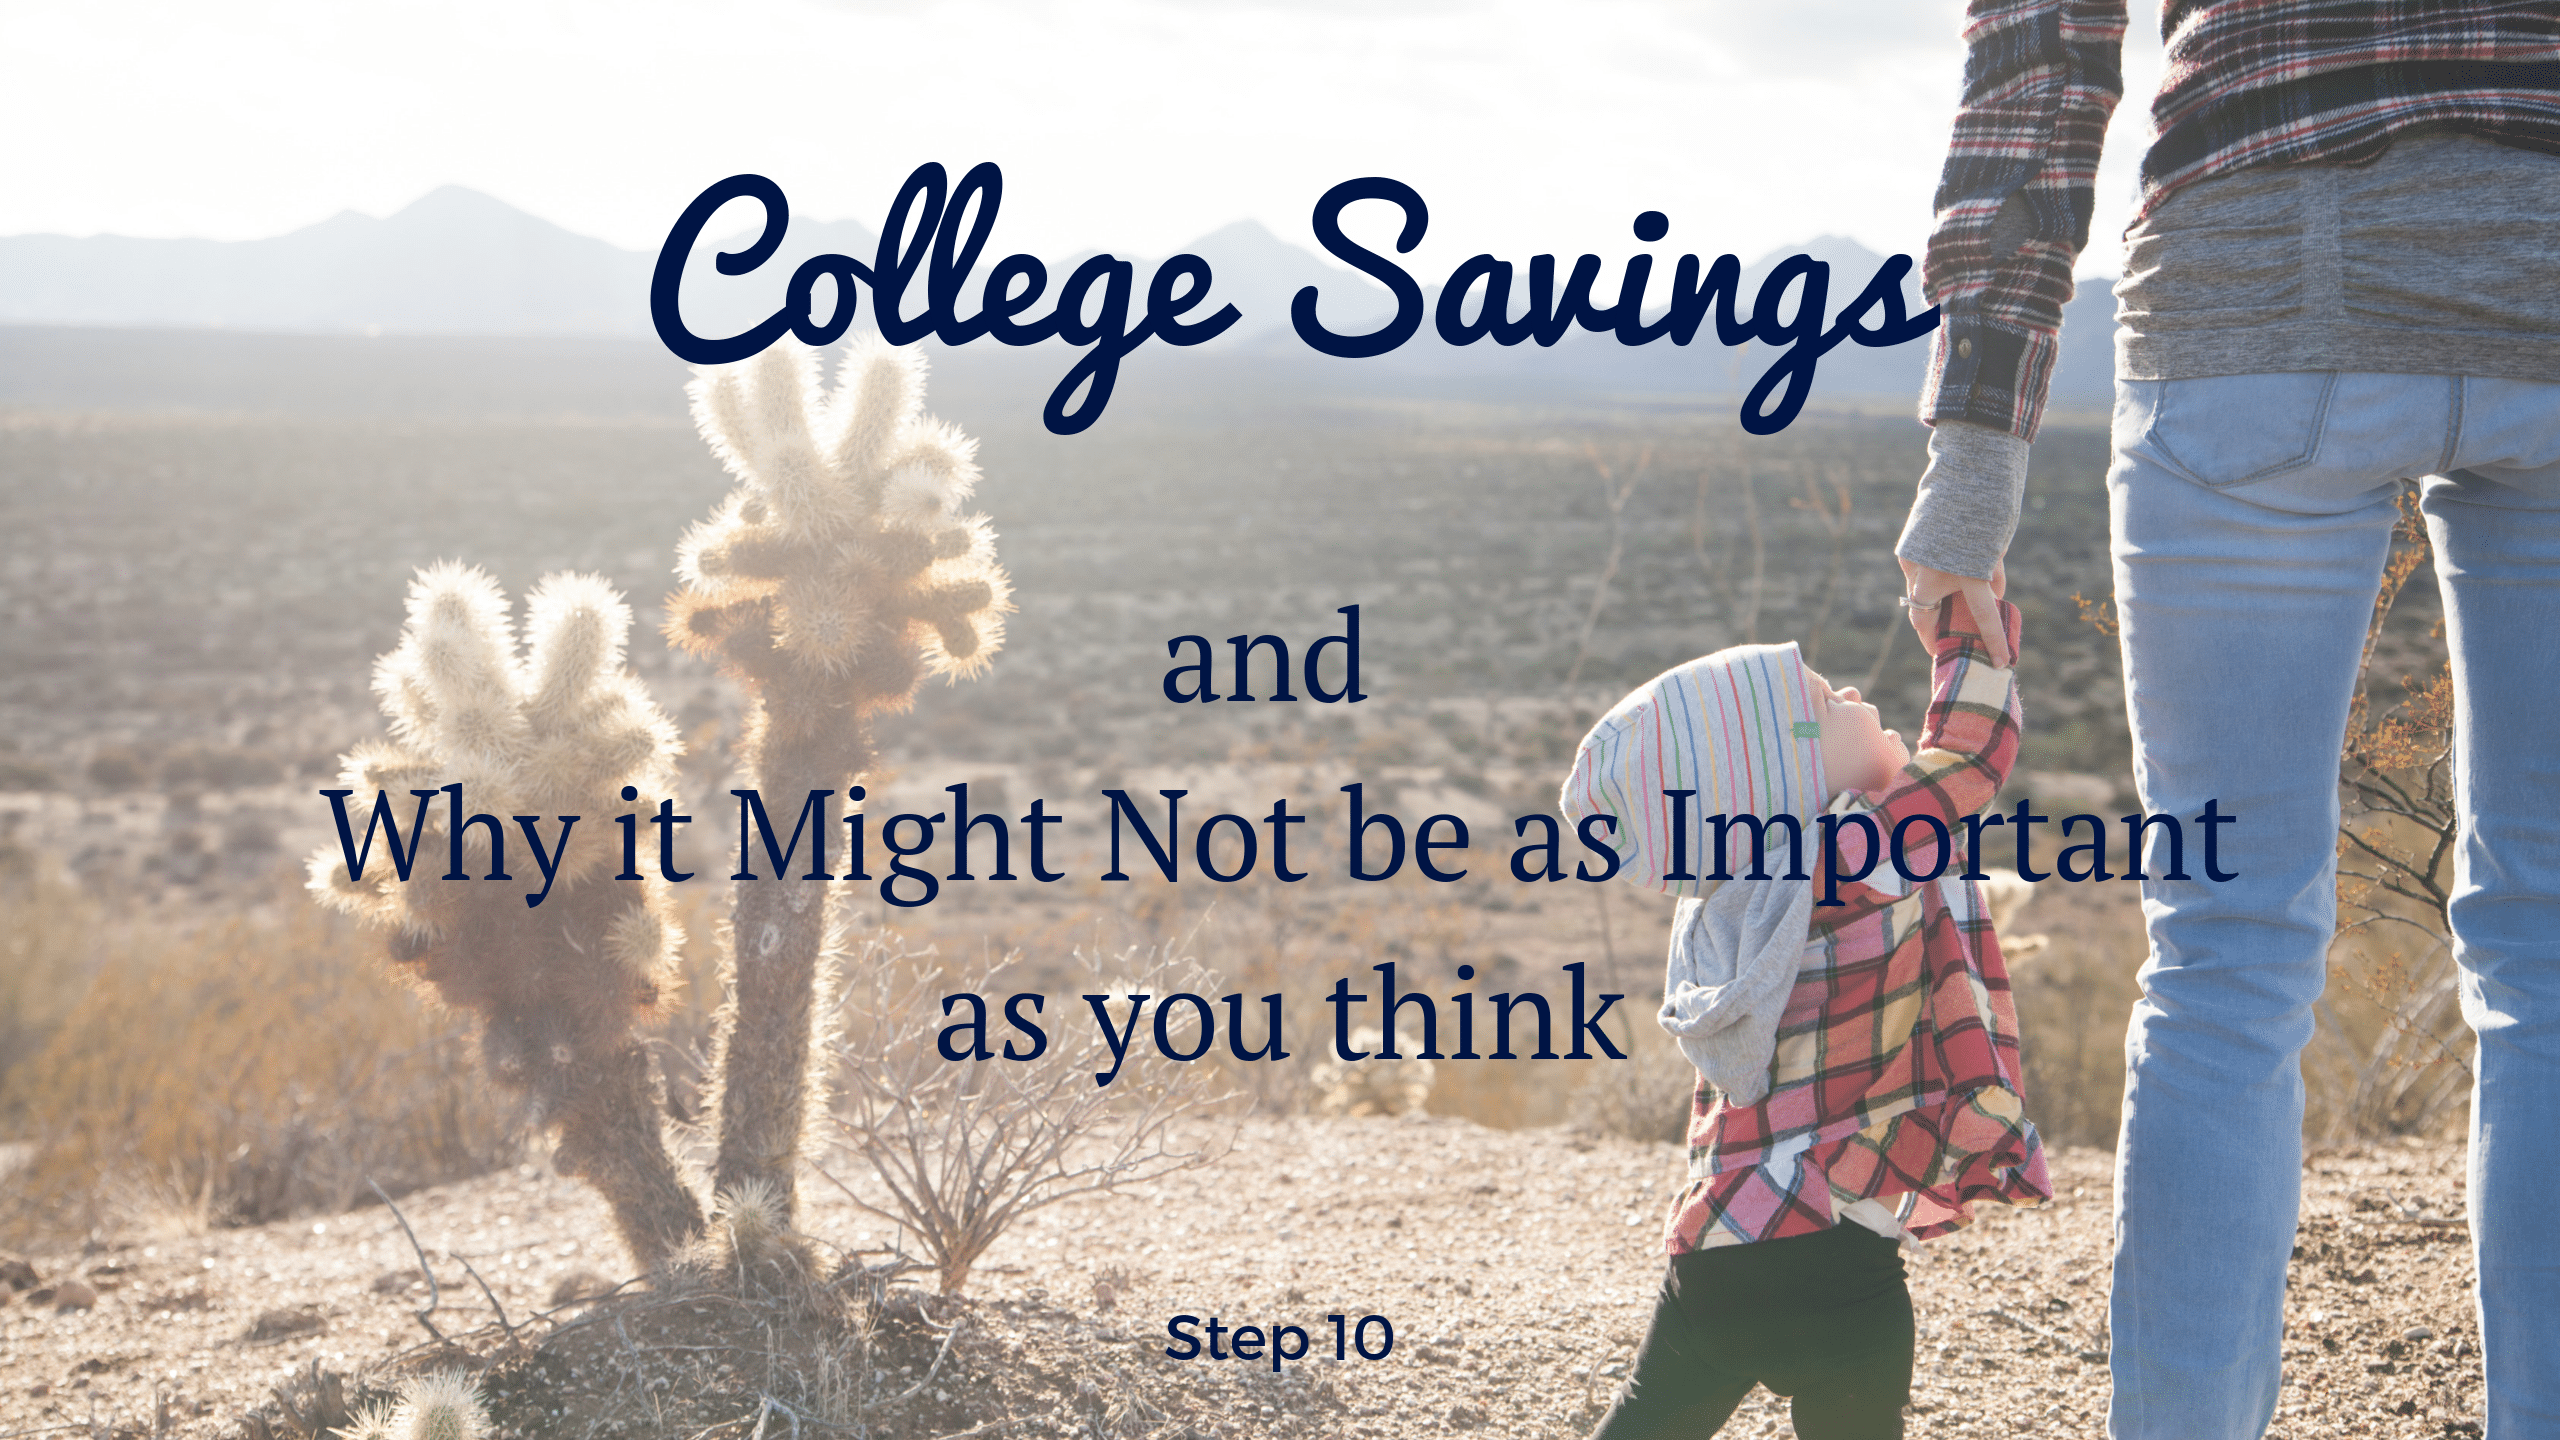 Article on why college savings may not be that important